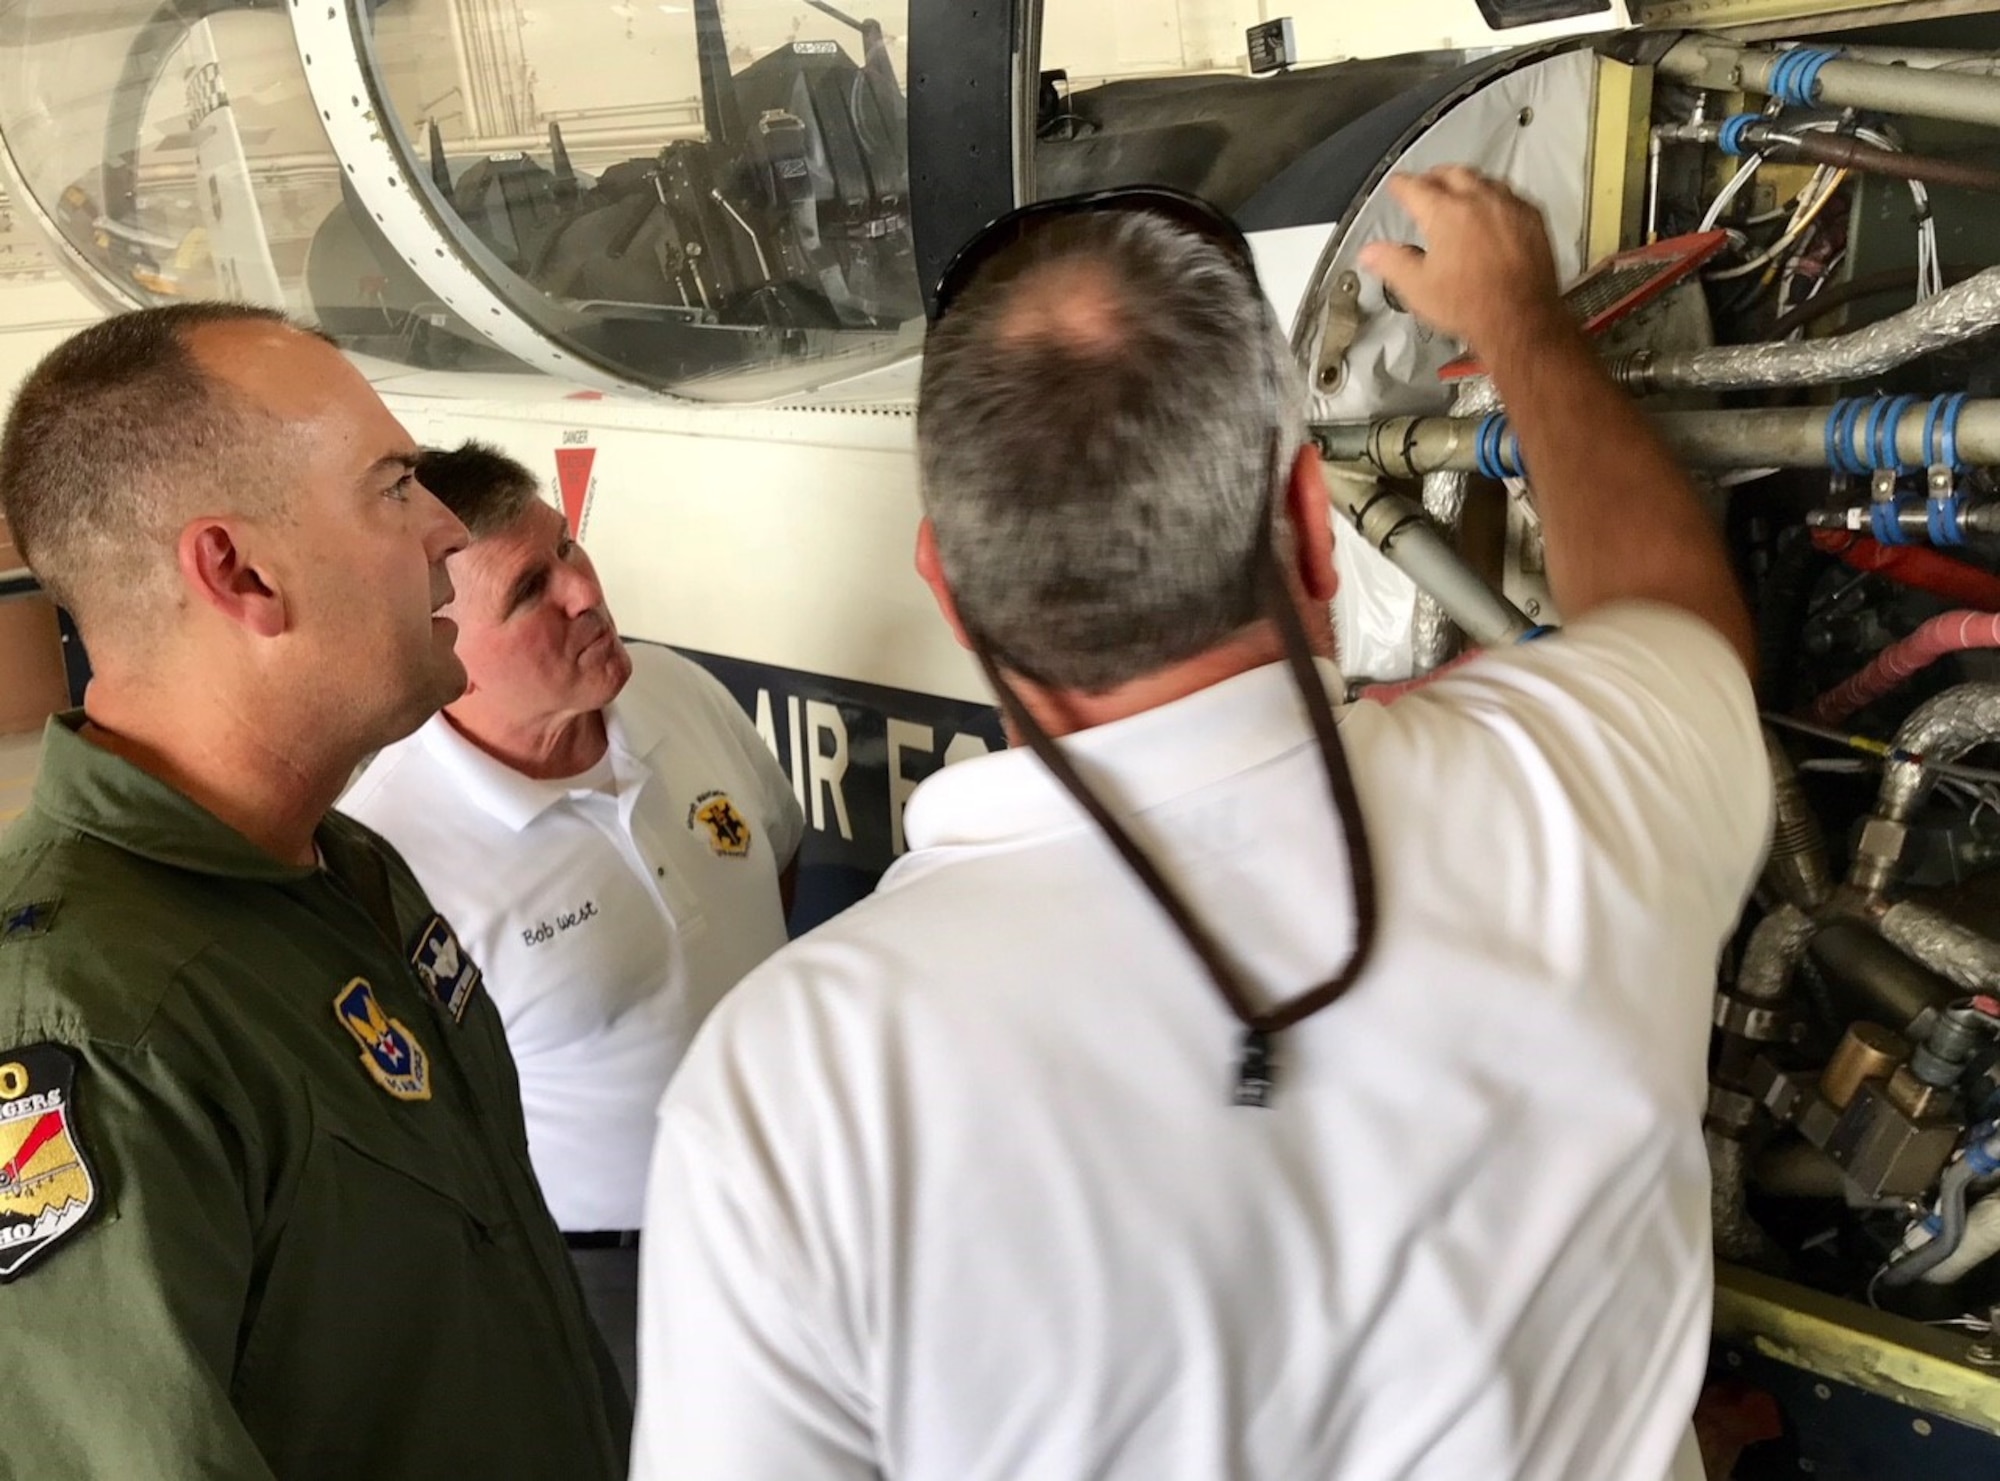 Brig. Gen. Ed “Hertz" Vaughan, the lead for the Air Force Physiological Events Action Team, and members of the 12th Flying Training Wing maintenance division examine an on-board oxygen generating system (OBOGS) from a T-6 aircraft at Randolph Air Force Base, Texas. (U.S. Air Force photo by Lt. Col. Kyle Goldstein)